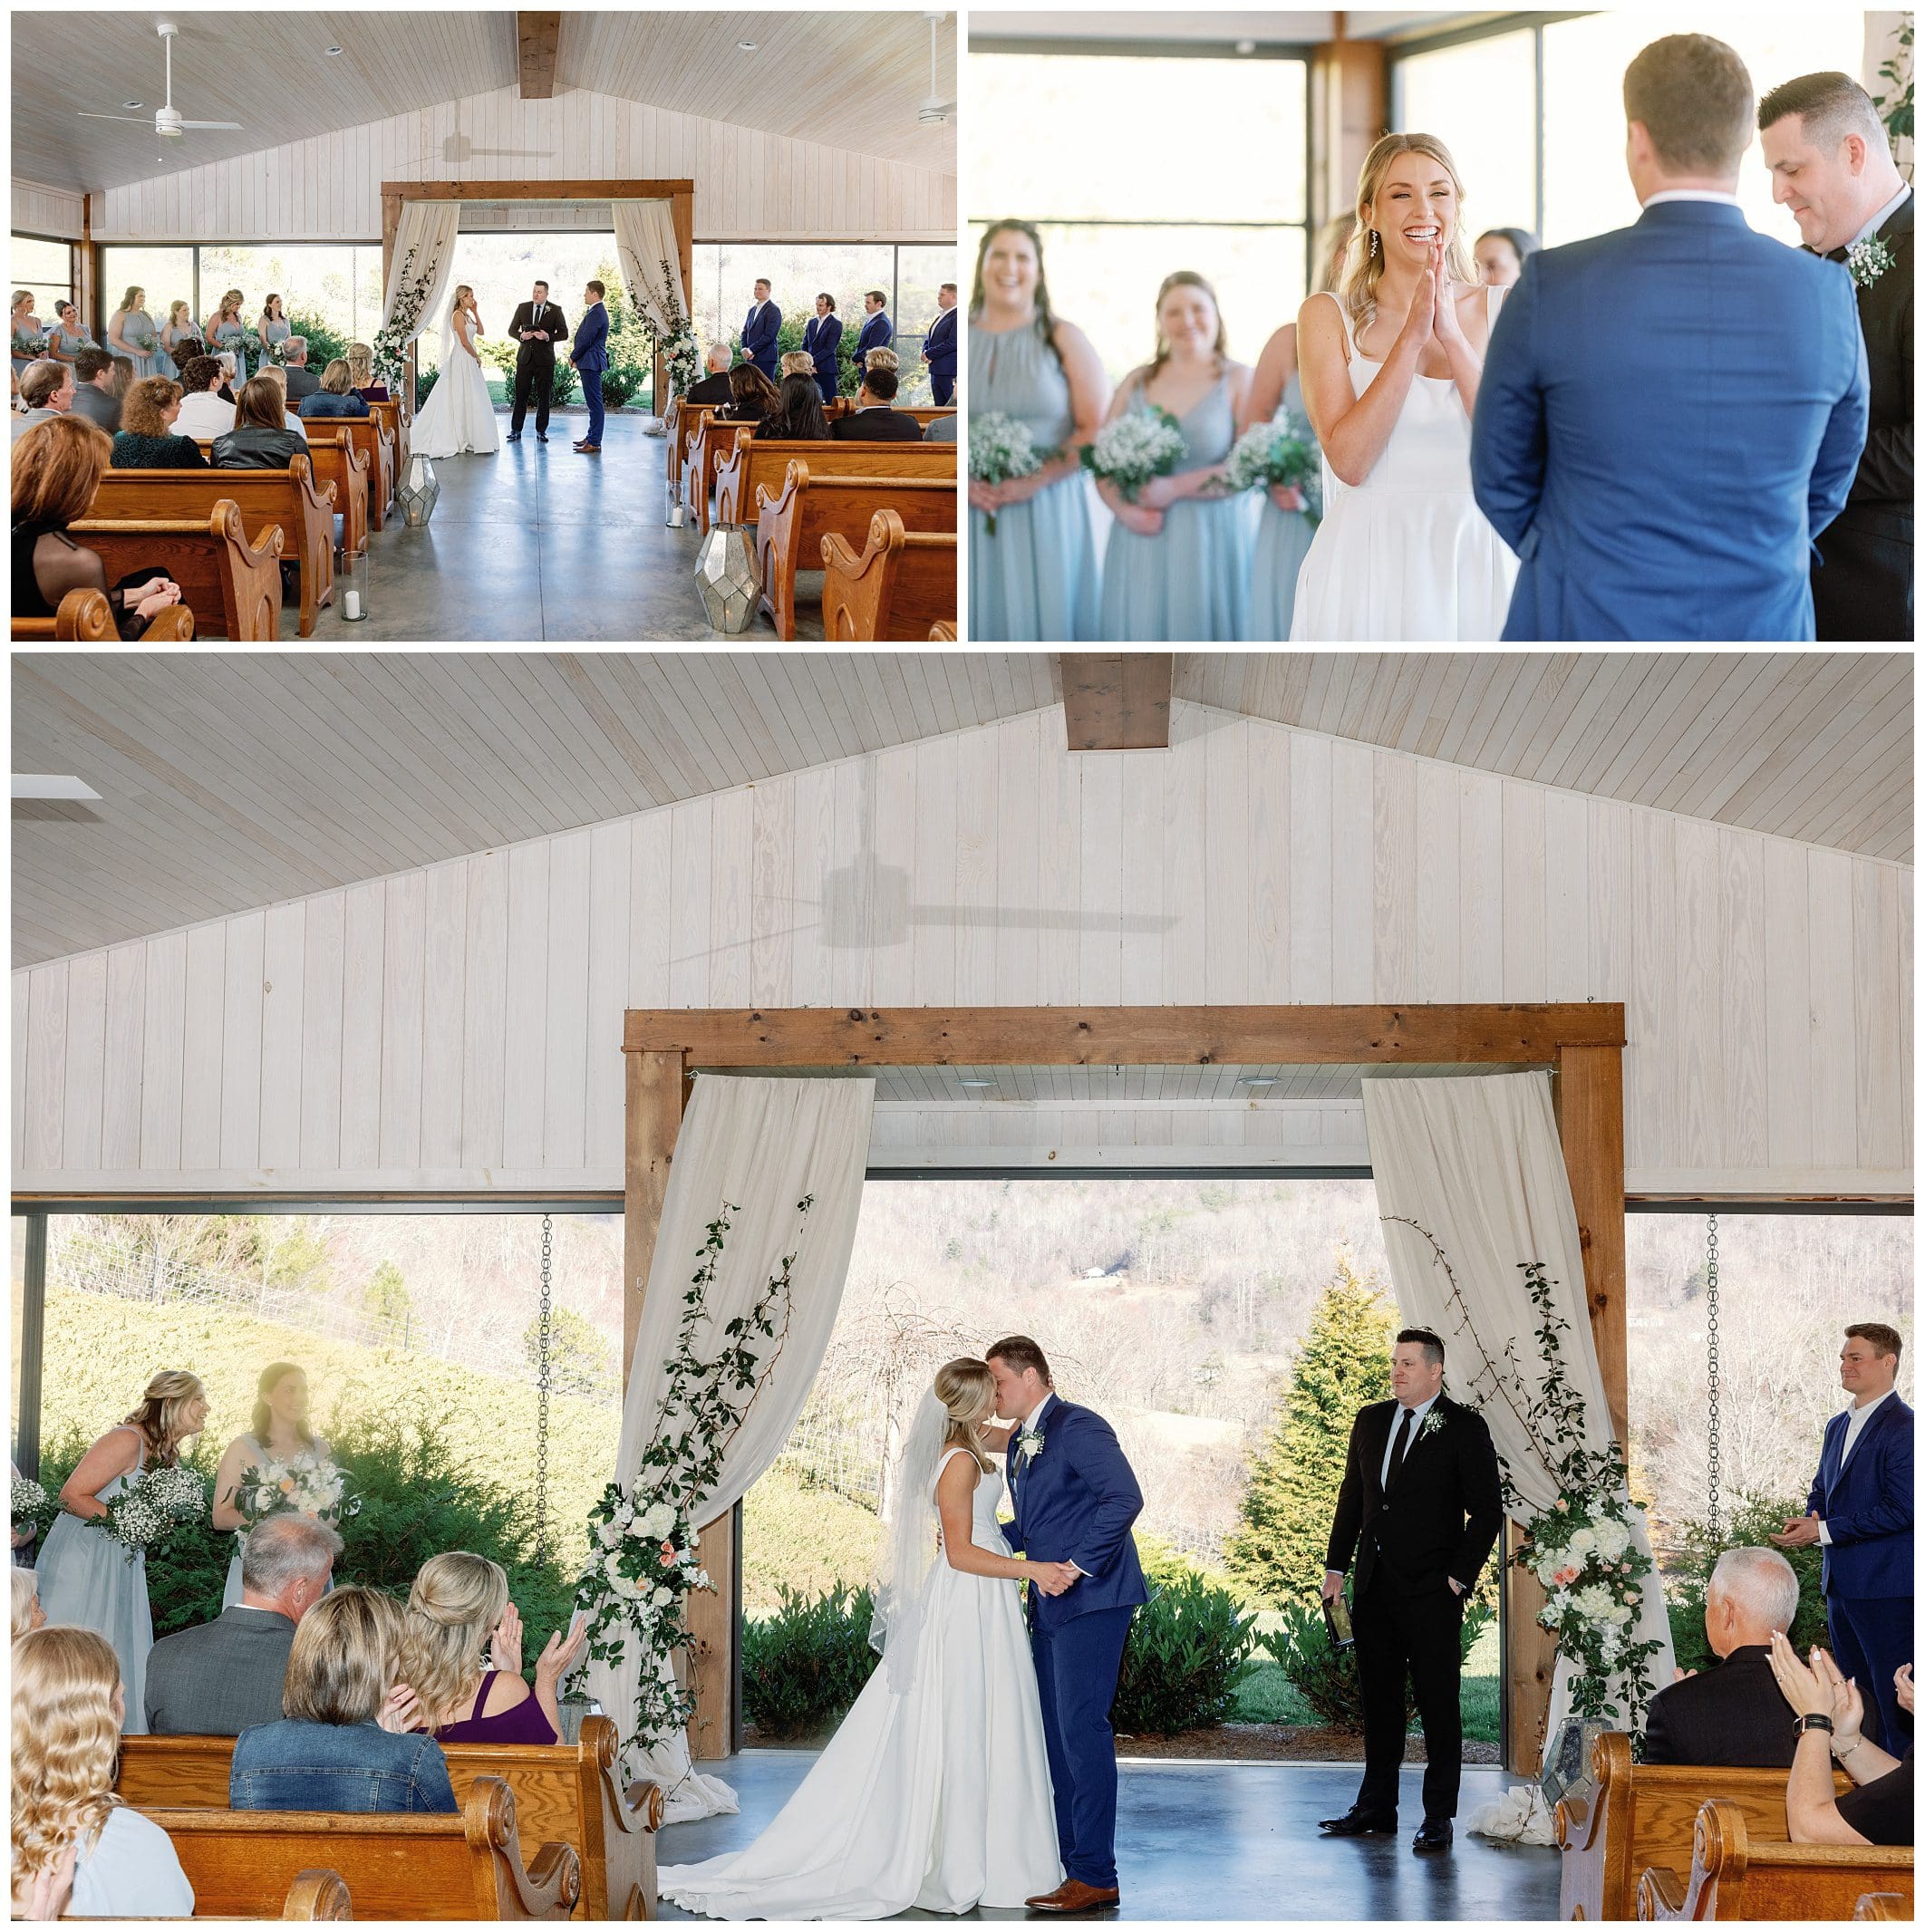 A bride and groom at their wedding ceremony in a barn.